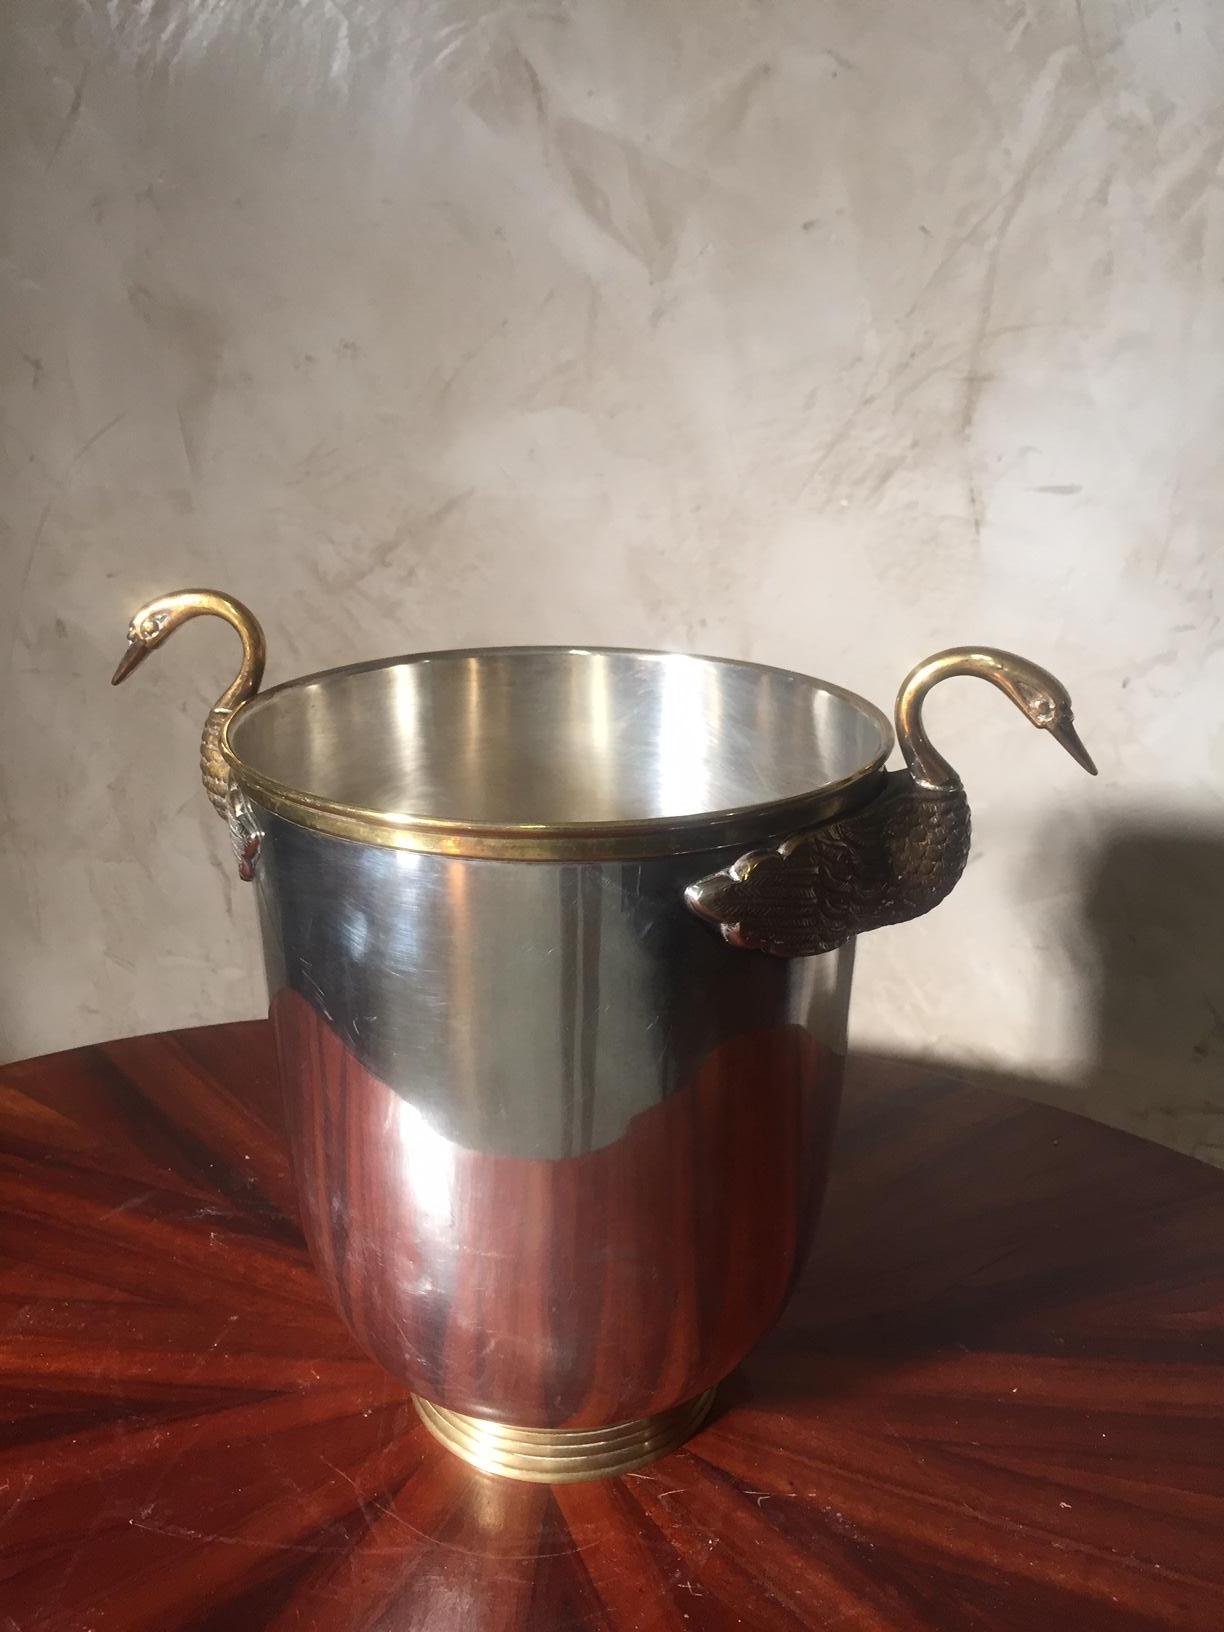 Very nice French silver plated ice bucket with head swans handles from 1950s.